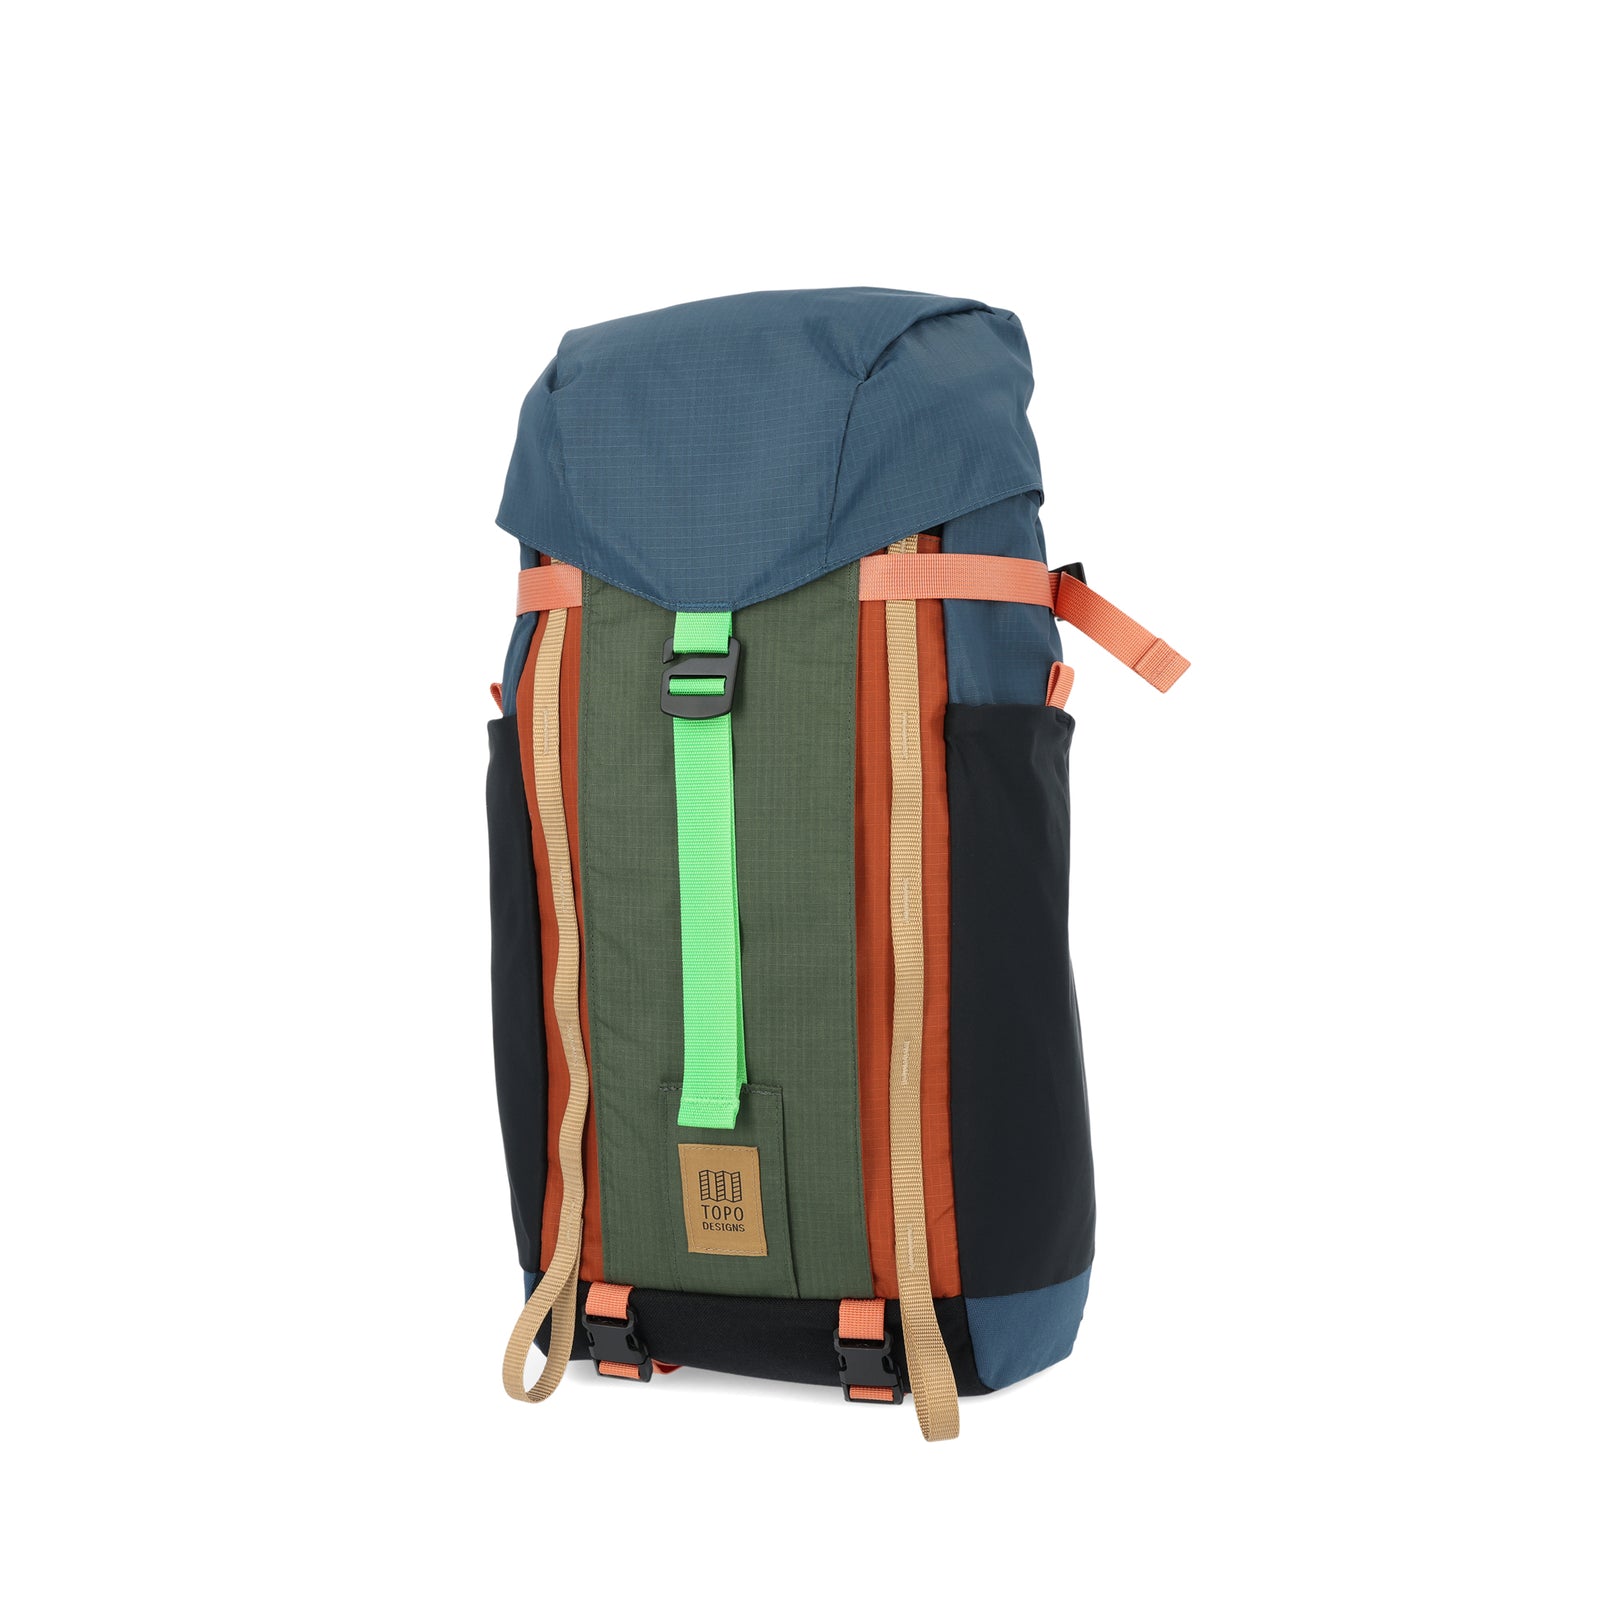 Topo Designs Mountain Pack 16L hiking backpack with internal laptop sleeve in lightweight recycled nylon "Pond Blue / Olive" green.